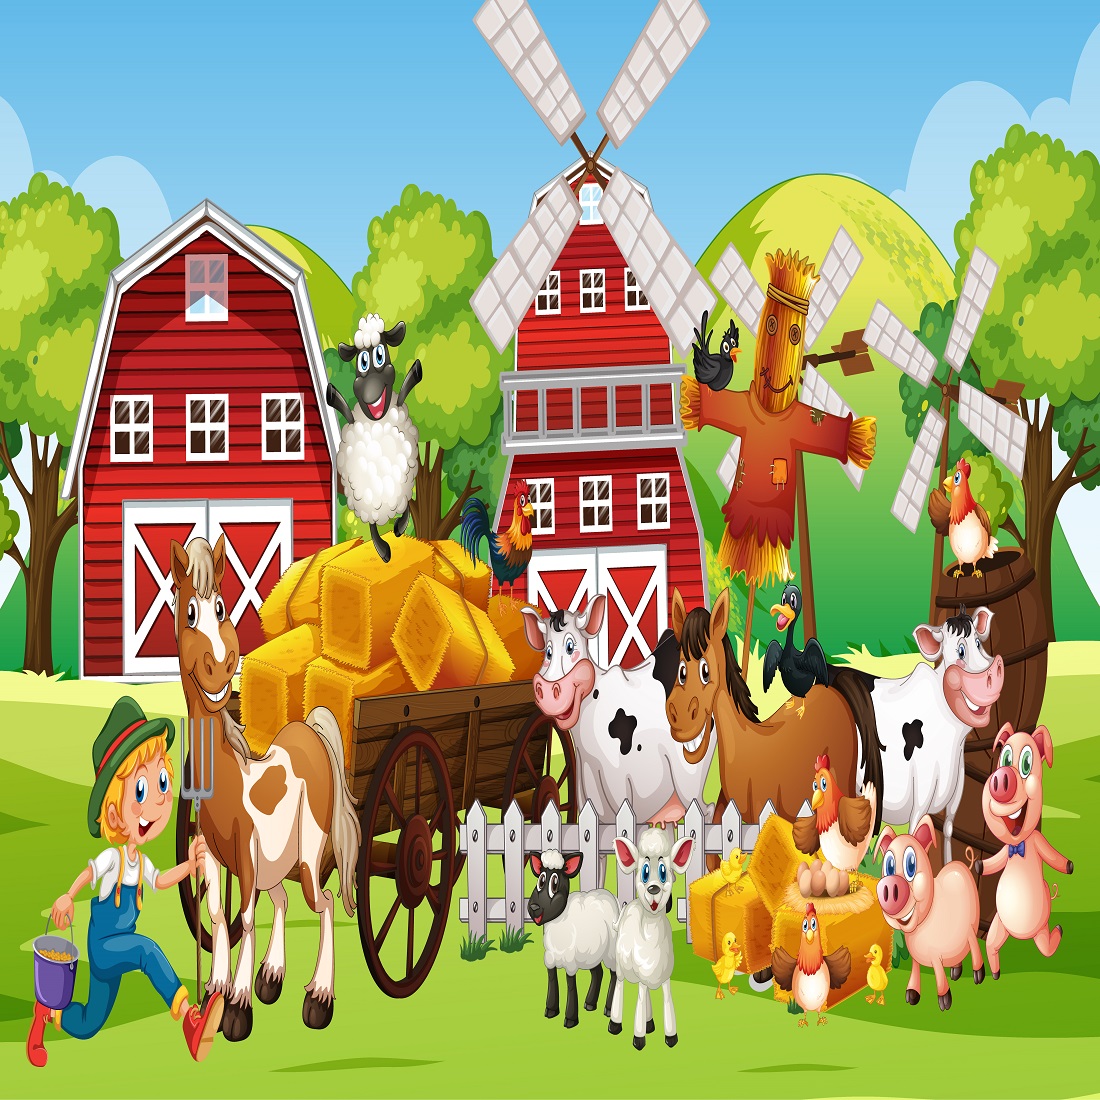 Farm scene with many farm animals preview image.